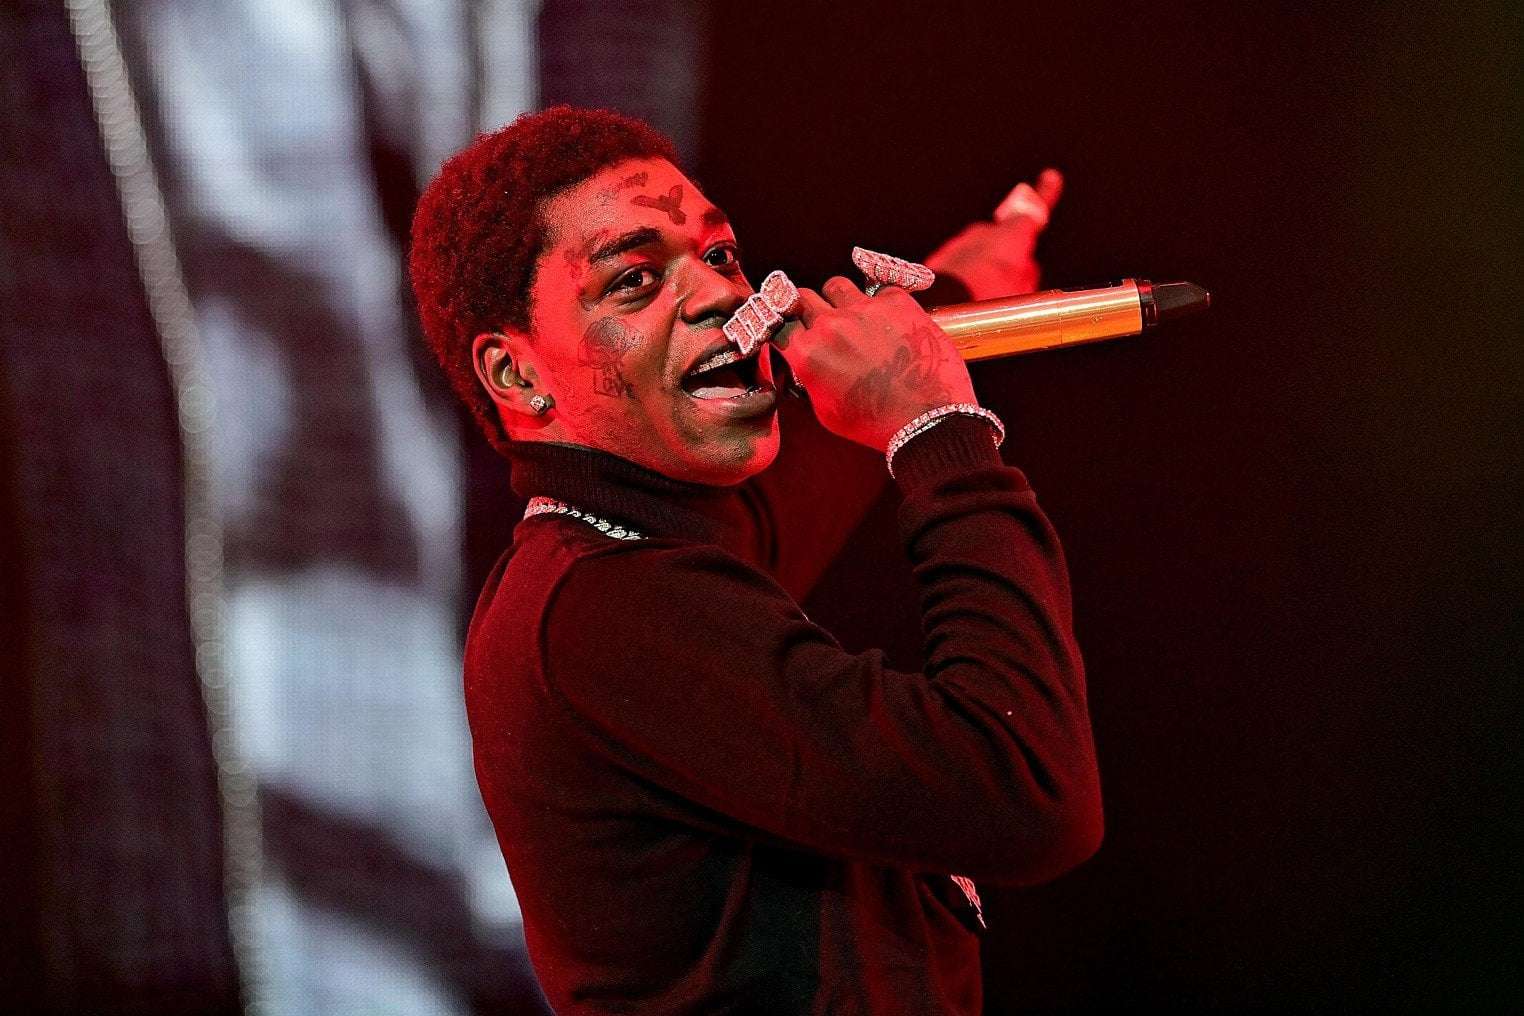 image for Kodak Black Stuffed Cocaine in Mouth During Traffic Stop, Police Say